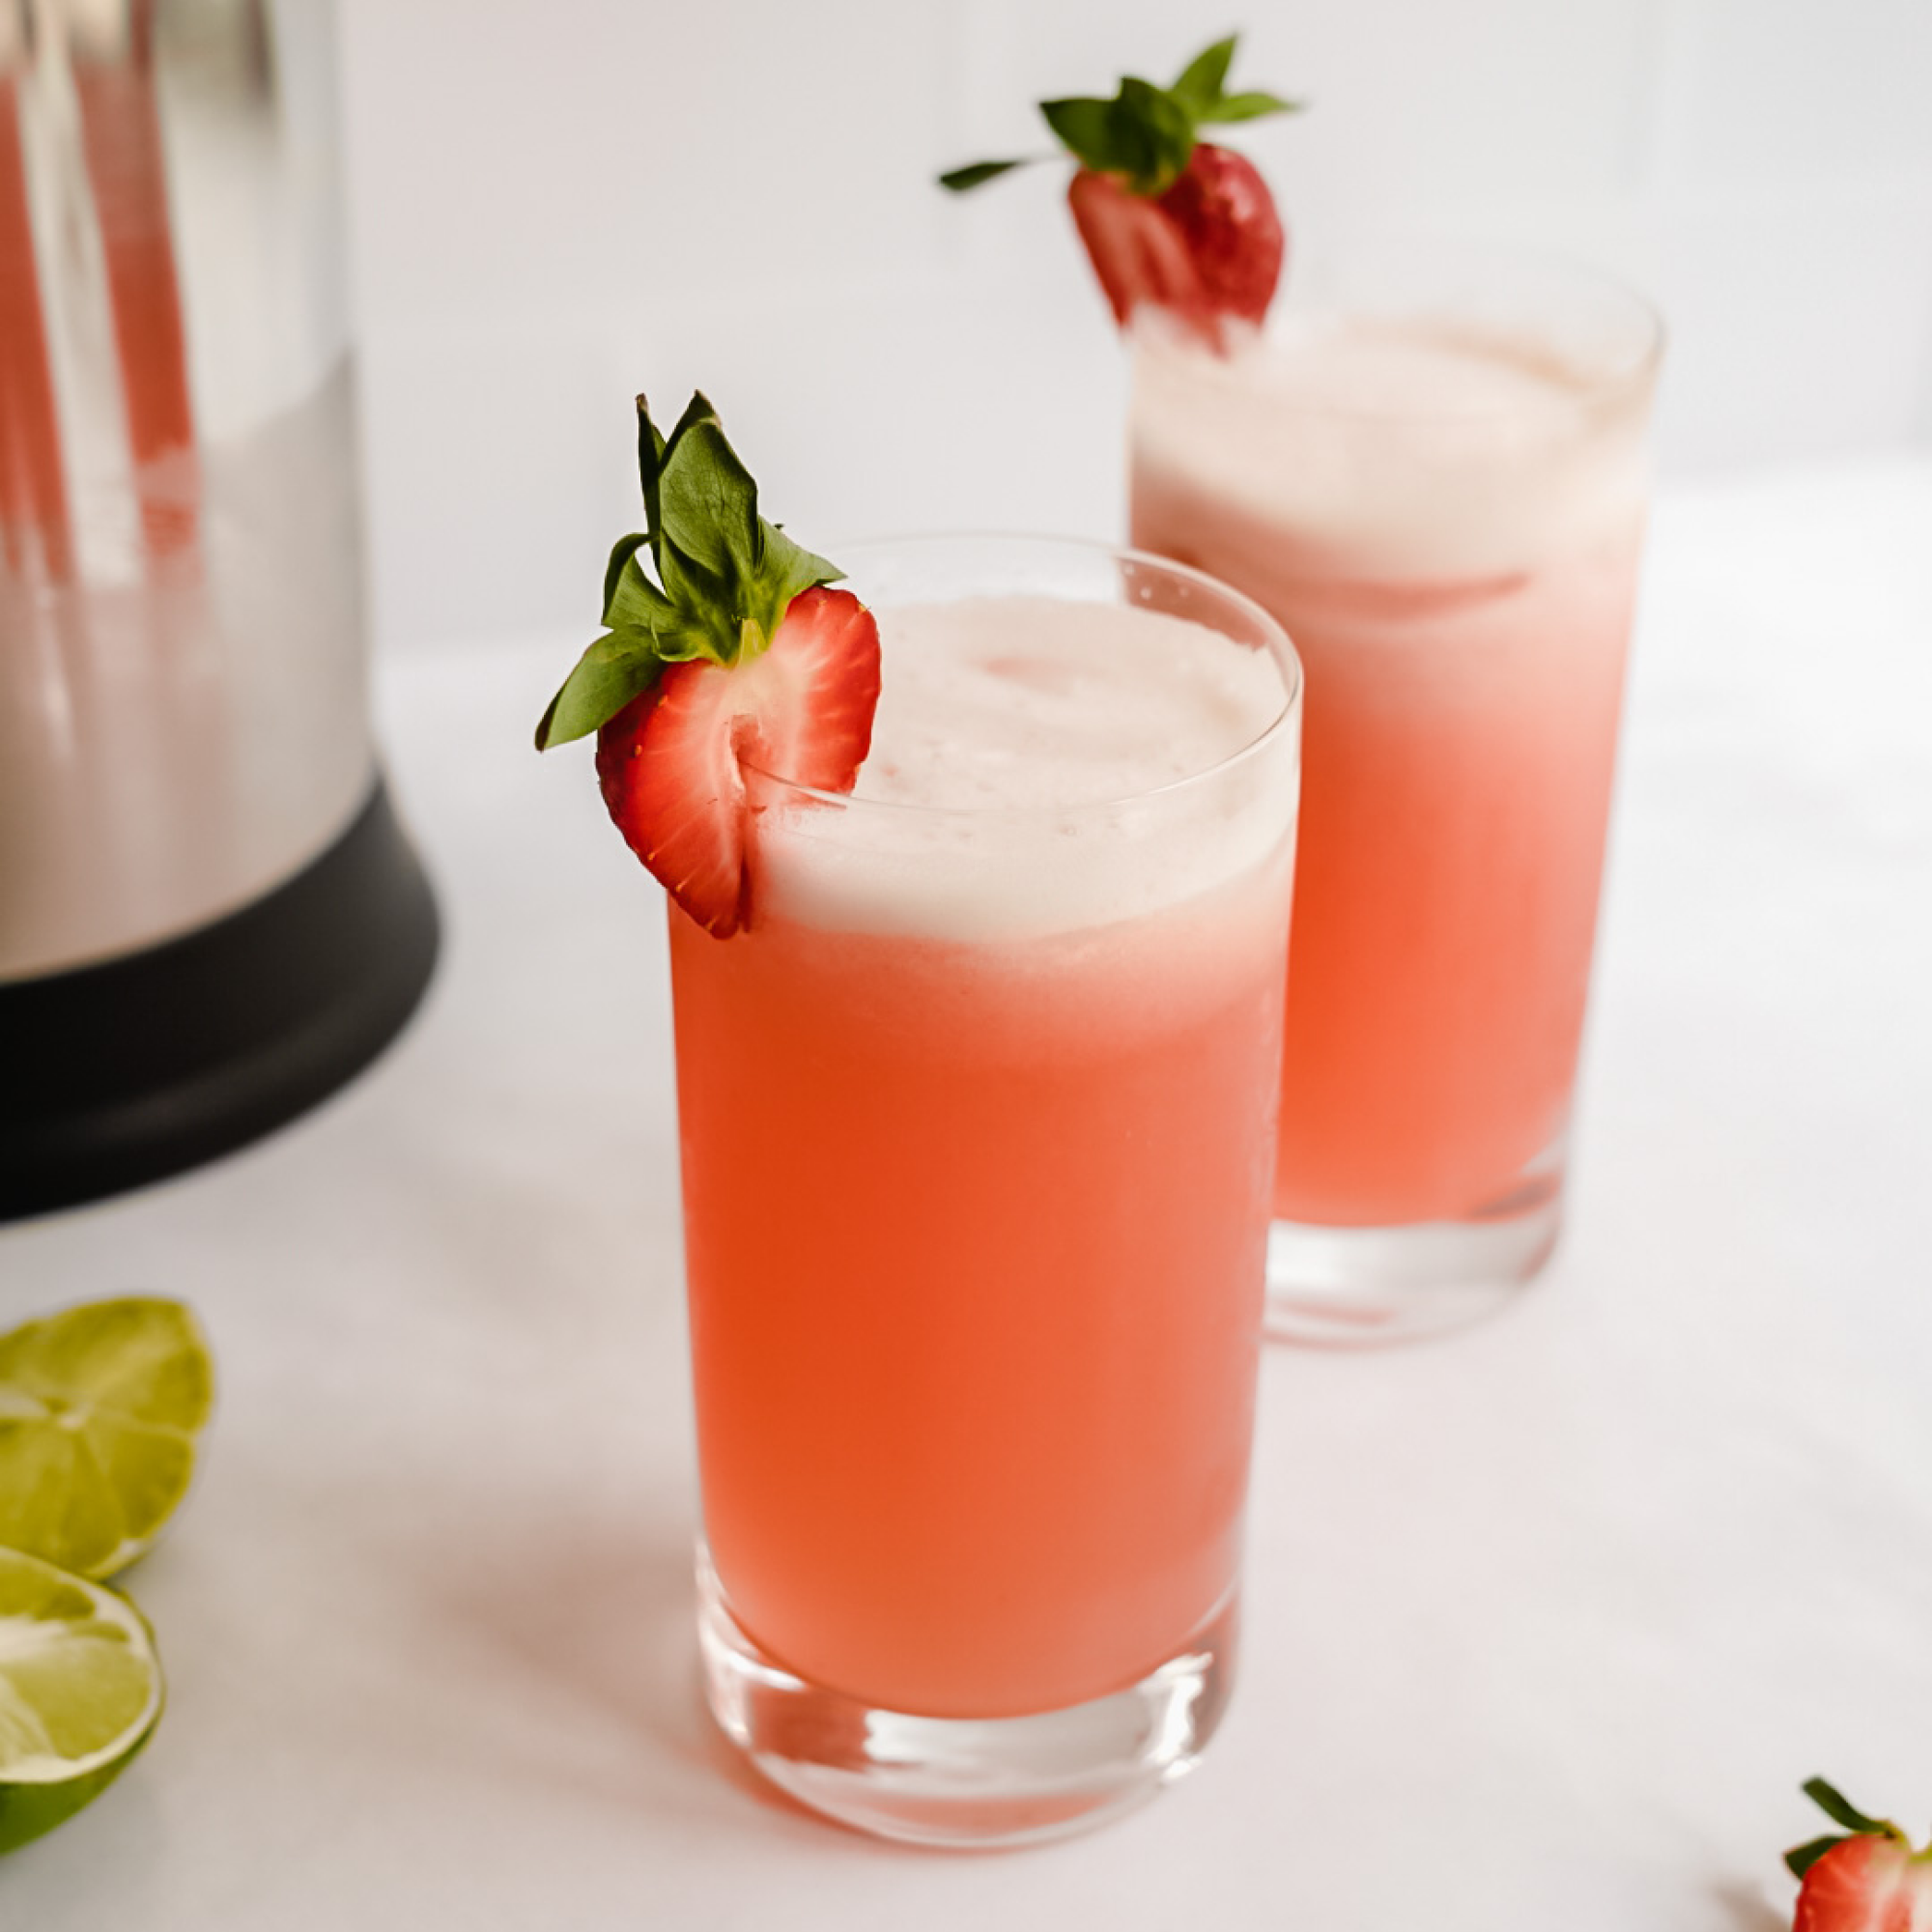 Strawberry Coconut Limeade made in the Almond Cow